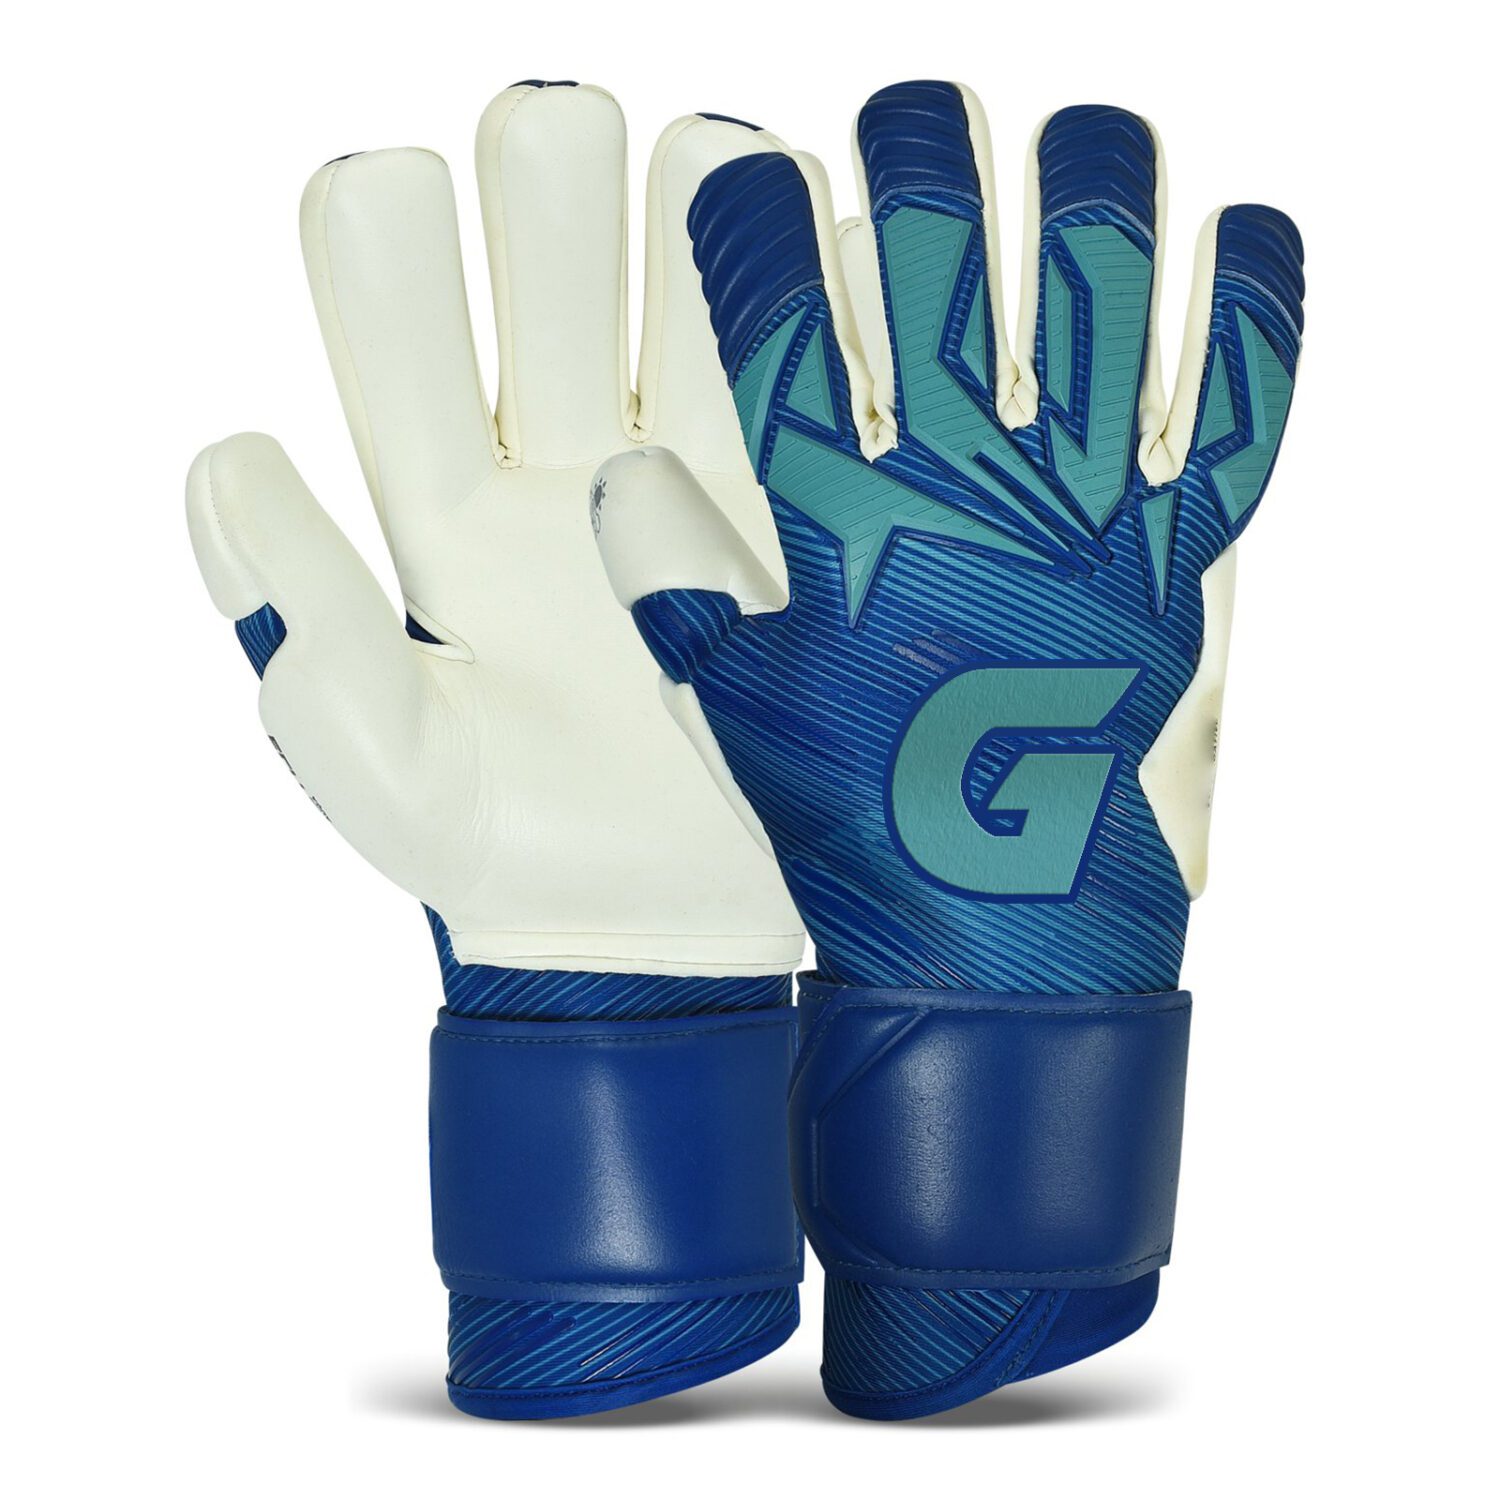 Professional Gloves